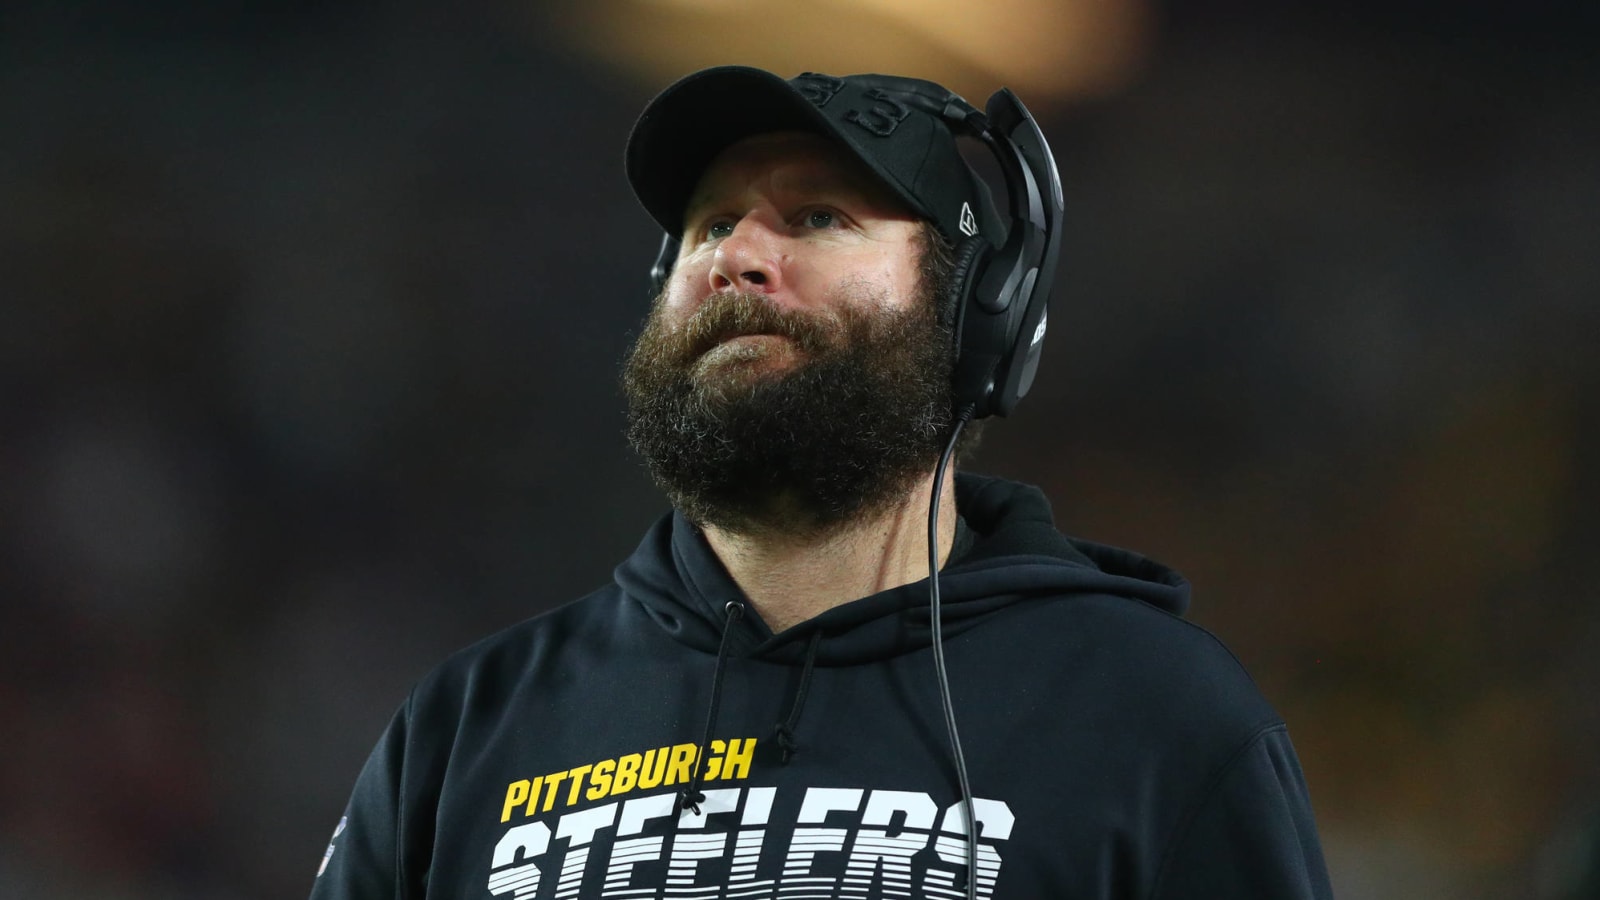 Ben Roethlisberger has a huge beard that is totally out of control